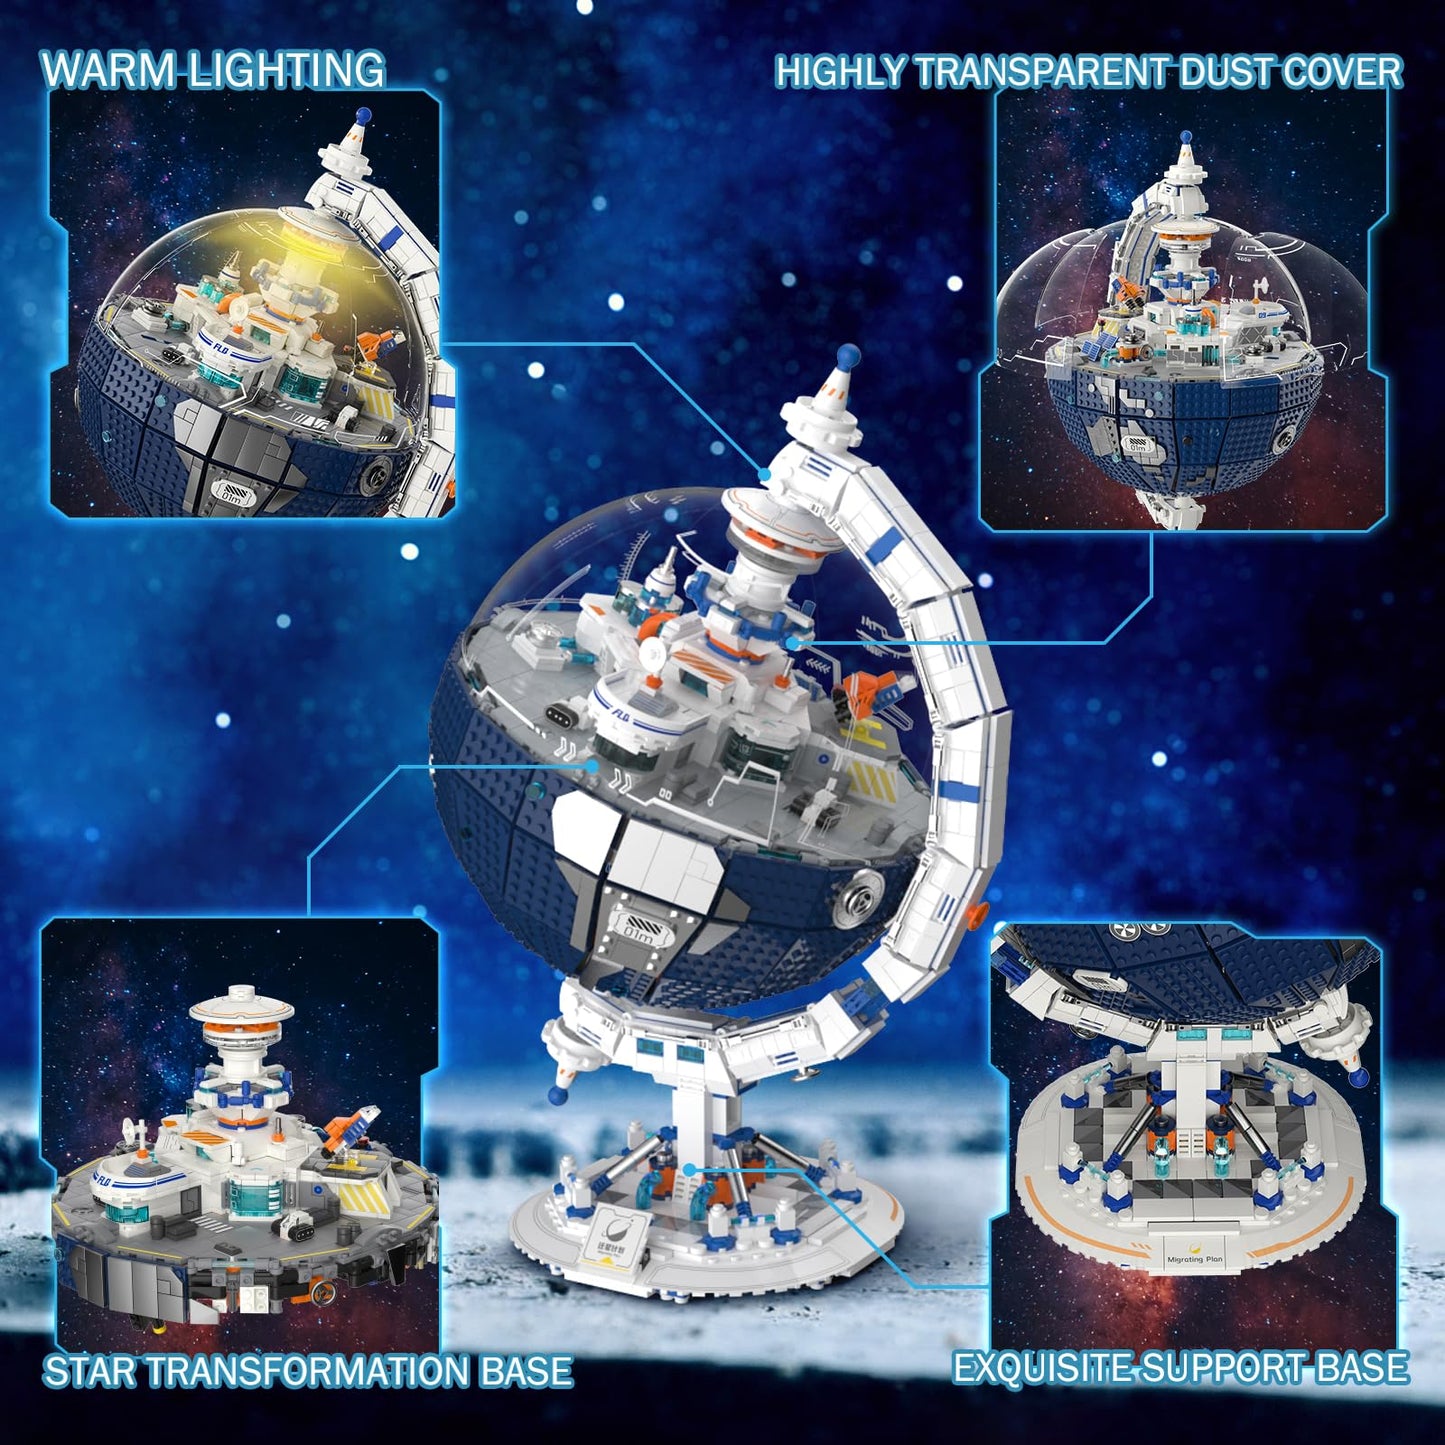 JMBricklayer Space Planet Immigration Station Building Blocks Kits for Adults 70006, 360° Rotating Sphere Block with Lights, Collectible World Globe Model, Gift Idea for Collectors Kids and Space Fans